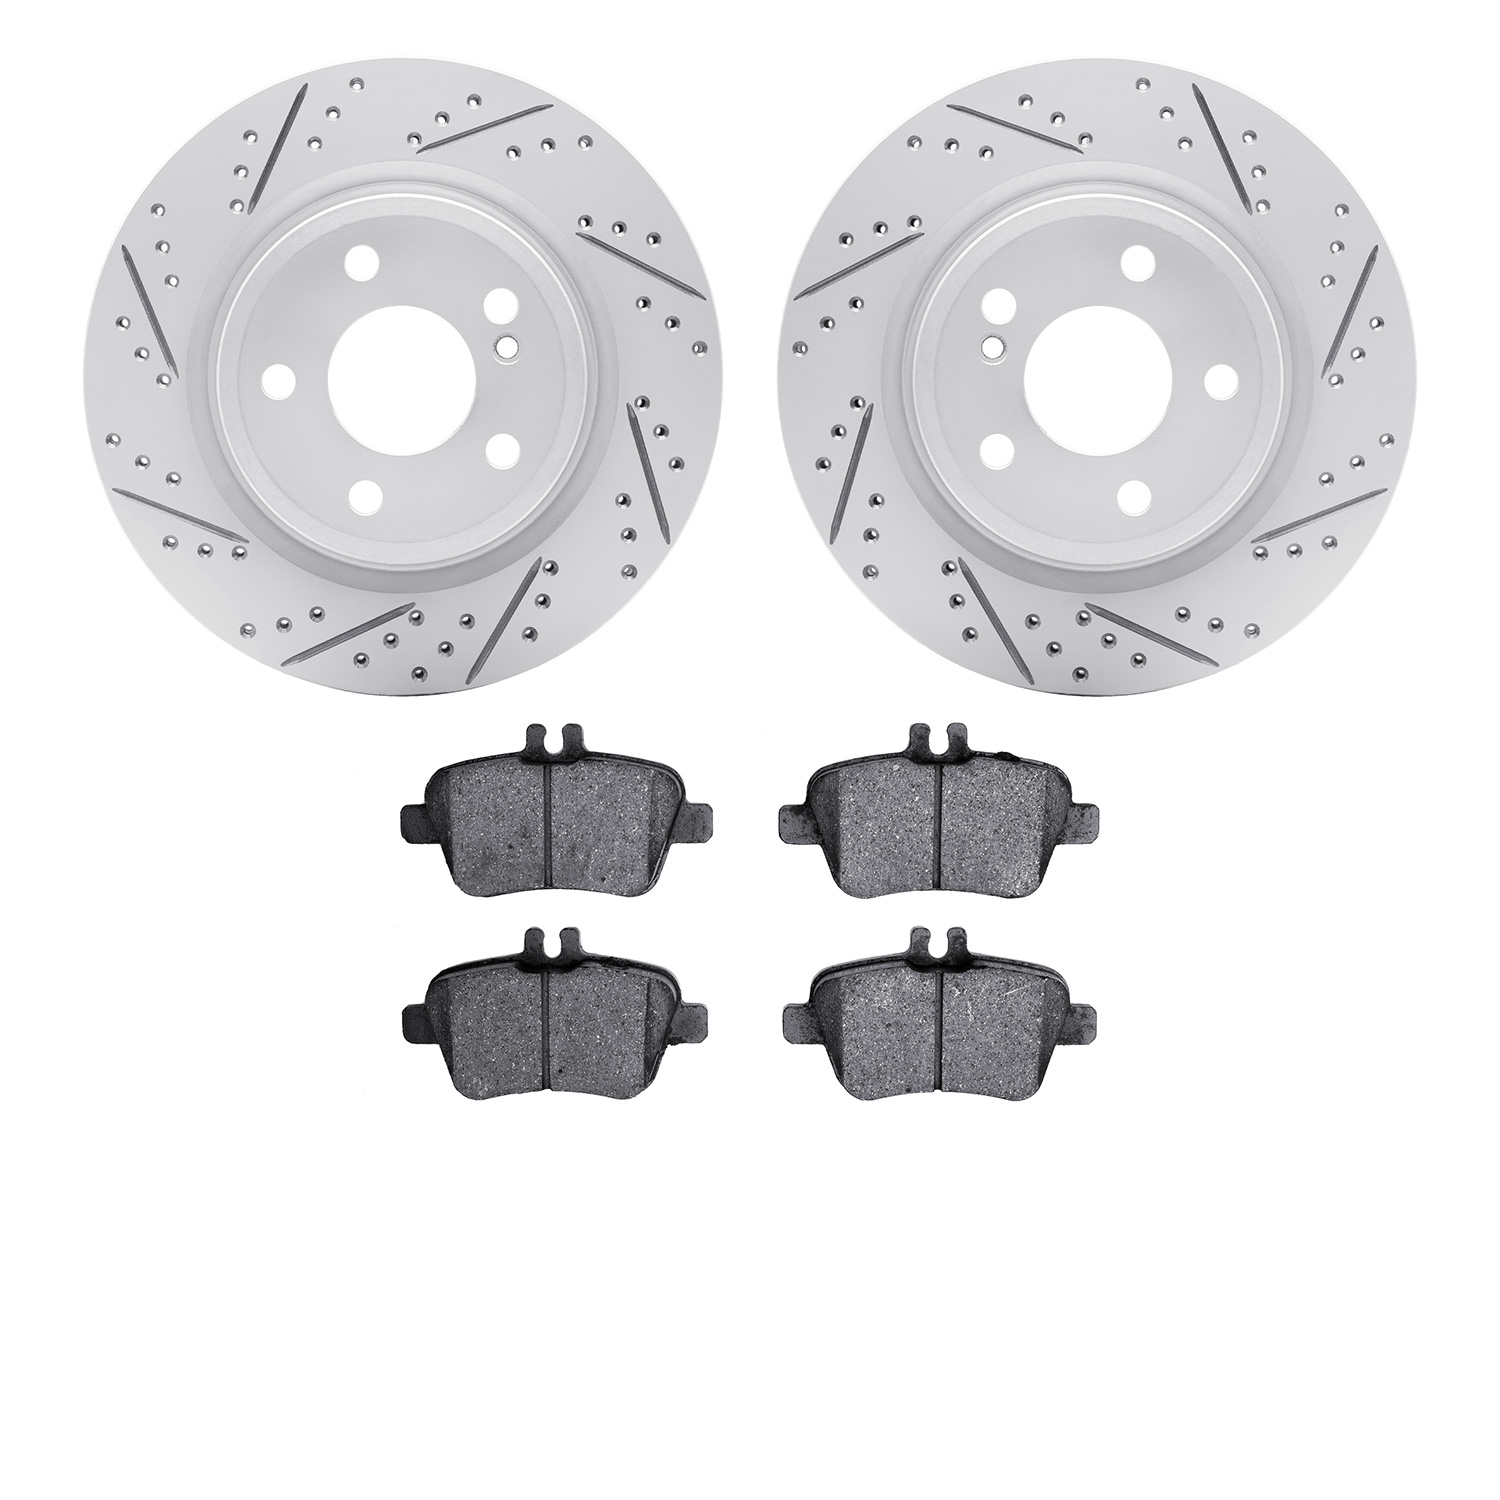 2502-63071 Geoperformance Drilled/Slotted Rotors w/5000 Advanced Brake Pads Kit, 2014-2019 Mercedes-Benz, Position: Rear